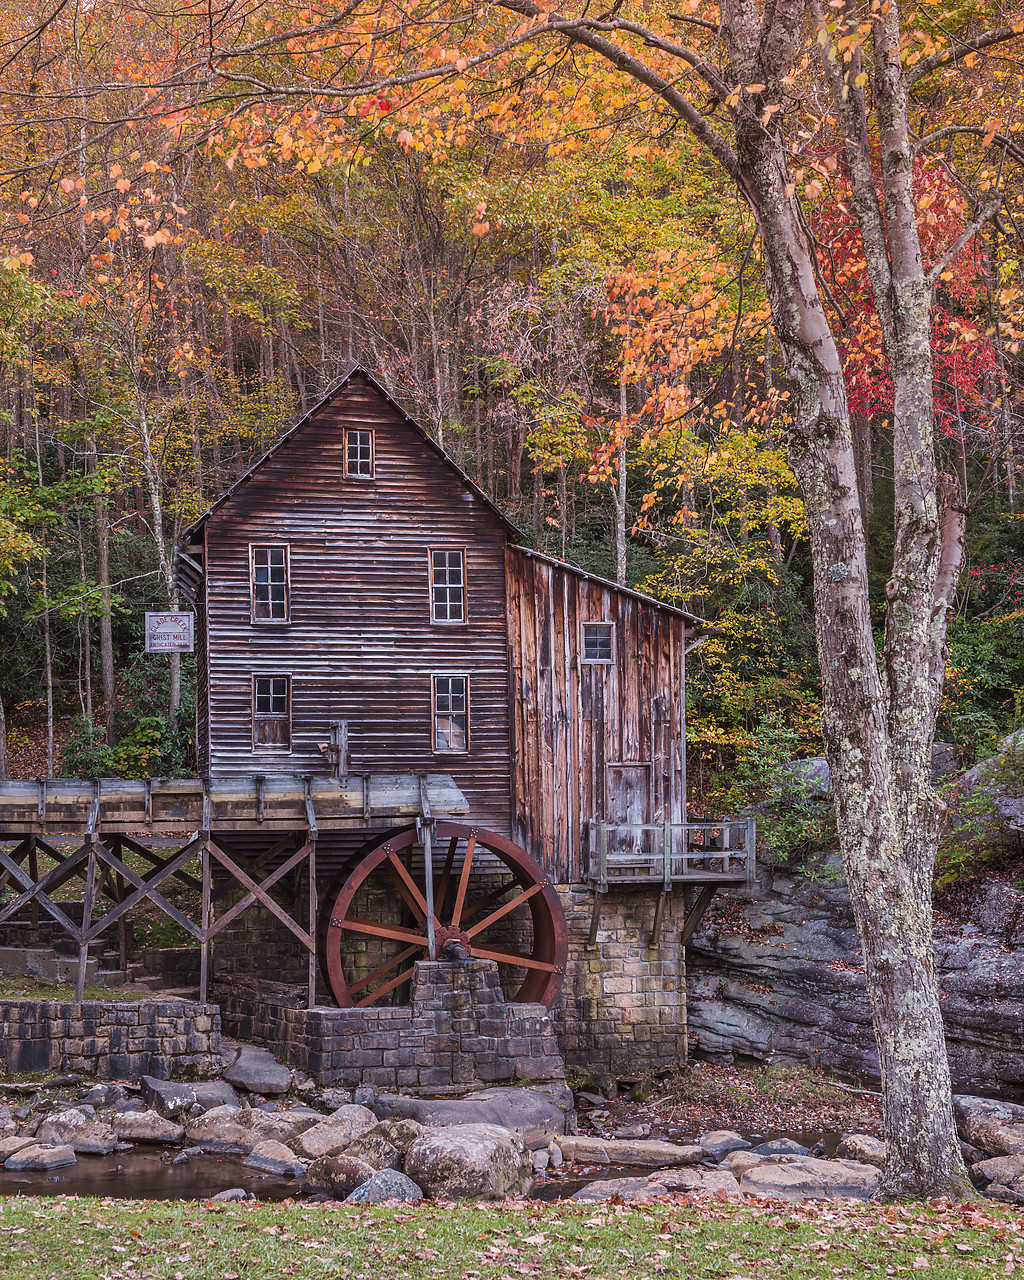 #130363-2 - Glade Creek Grist Mill in Autumn, Babcock State Park, West Virginia, USA